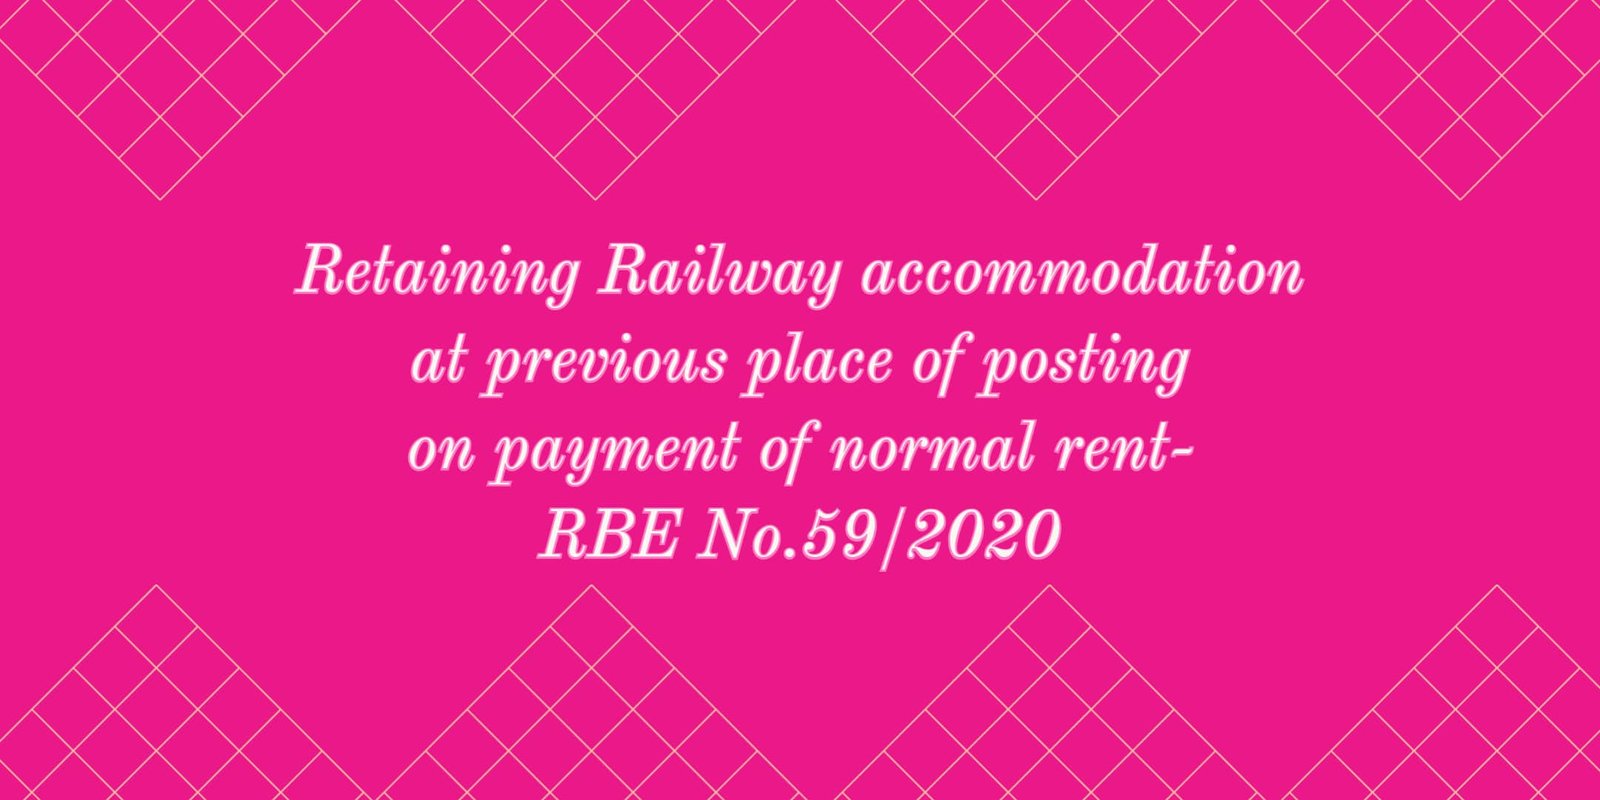 Retaining Railway accommodation at previous place of posting on payment of normal rent- RBE No.59_2020